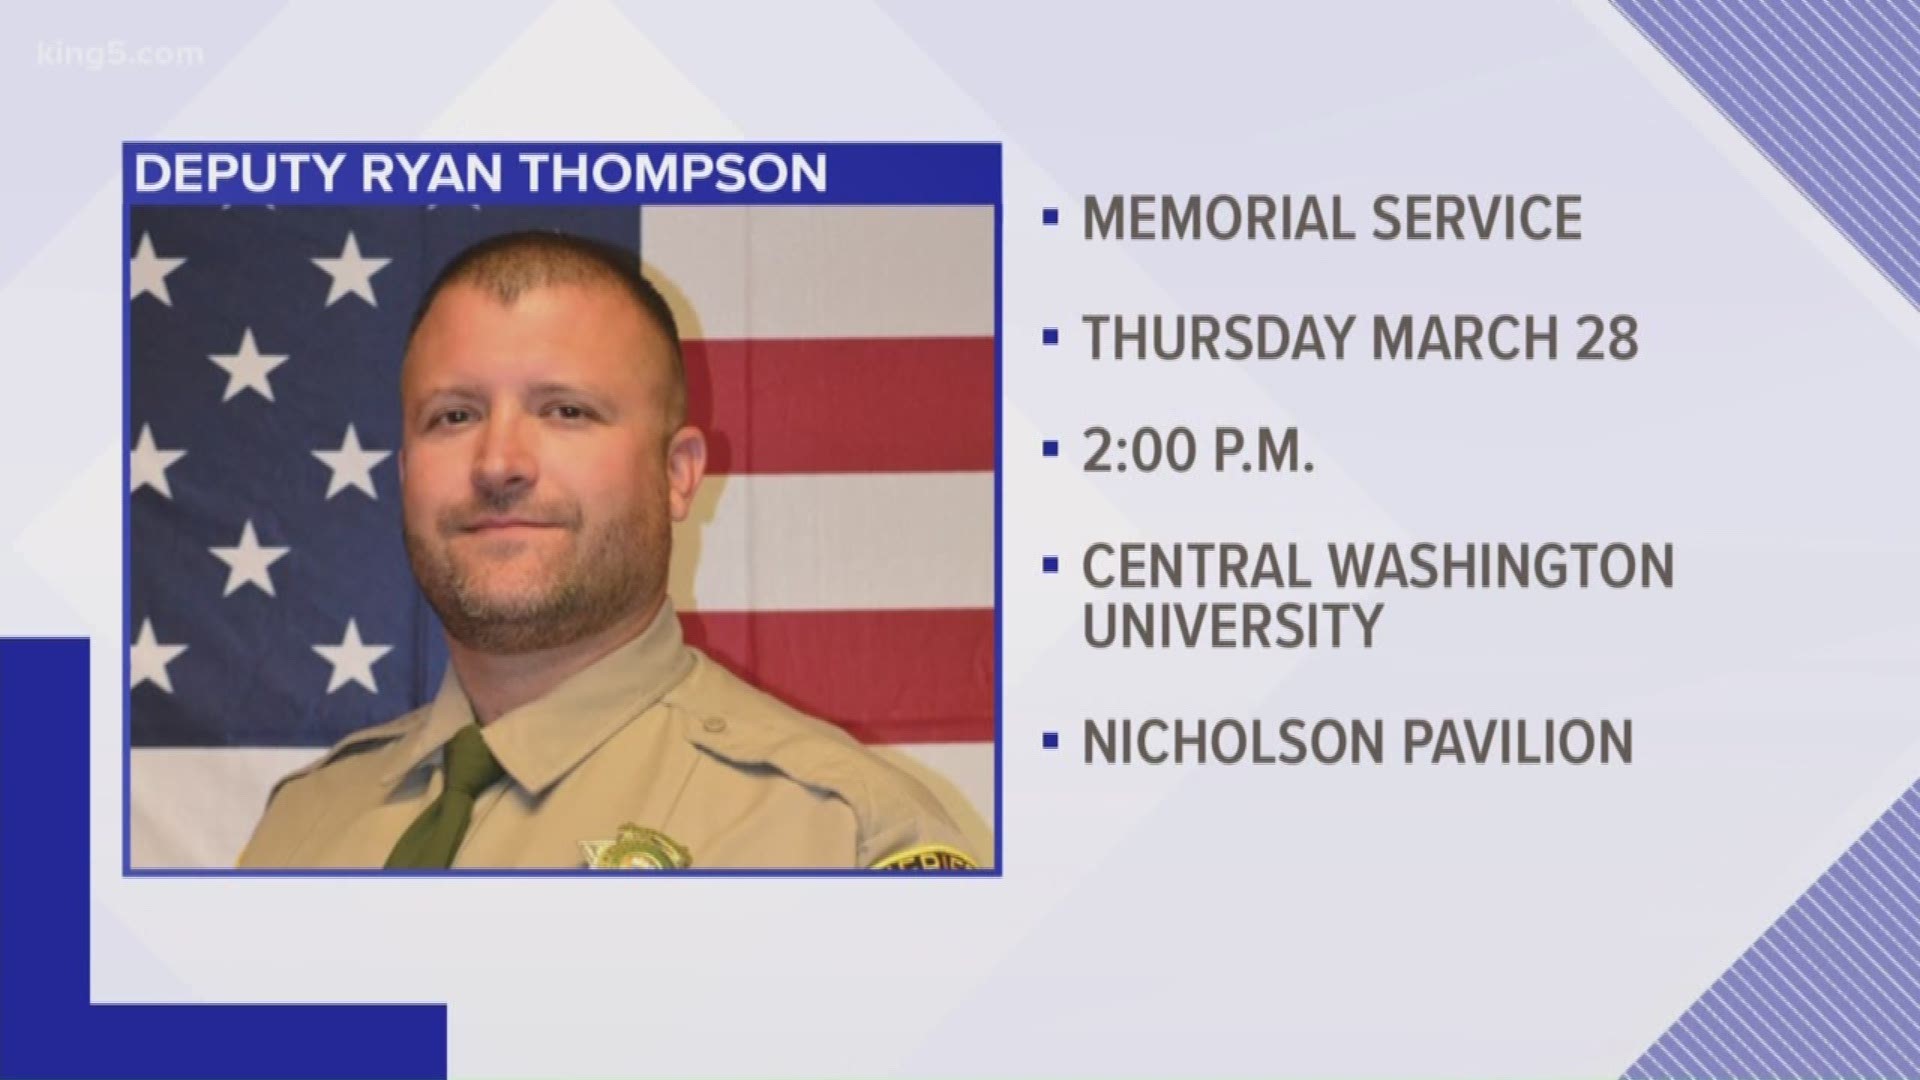 A memorial for slain Kittitas County Ryan Thompson will be held at Central Washington University on Thursday, March 28 at 2 p.m.